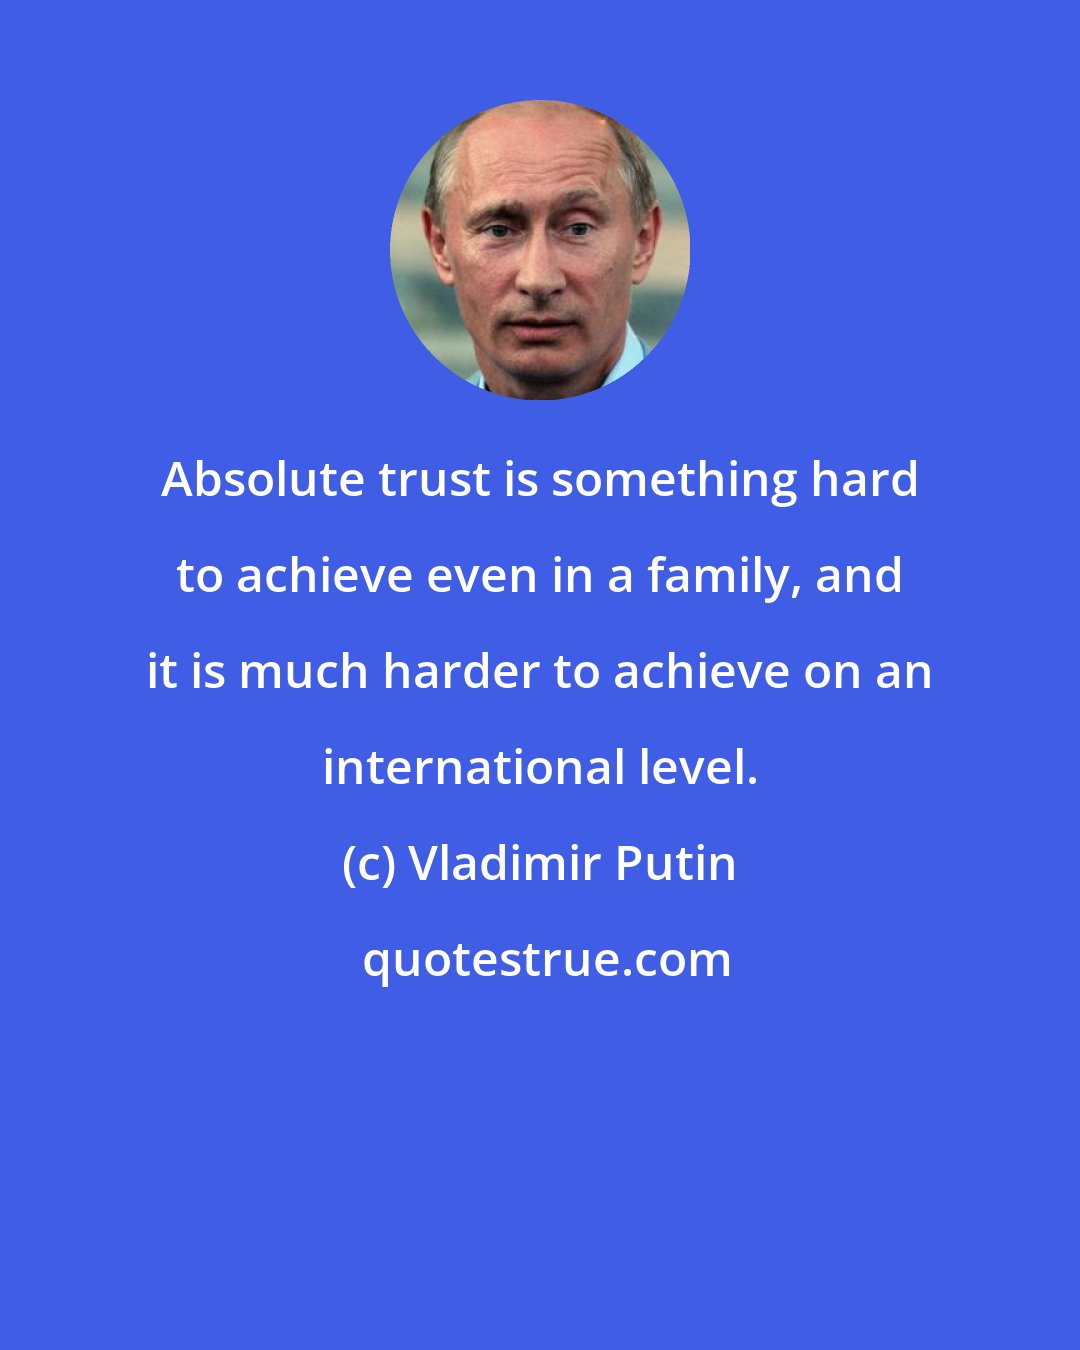 Vladimir Putin: Absolute trust is something hard to achieve even in a family, and it is much harder to achieve on an international level.